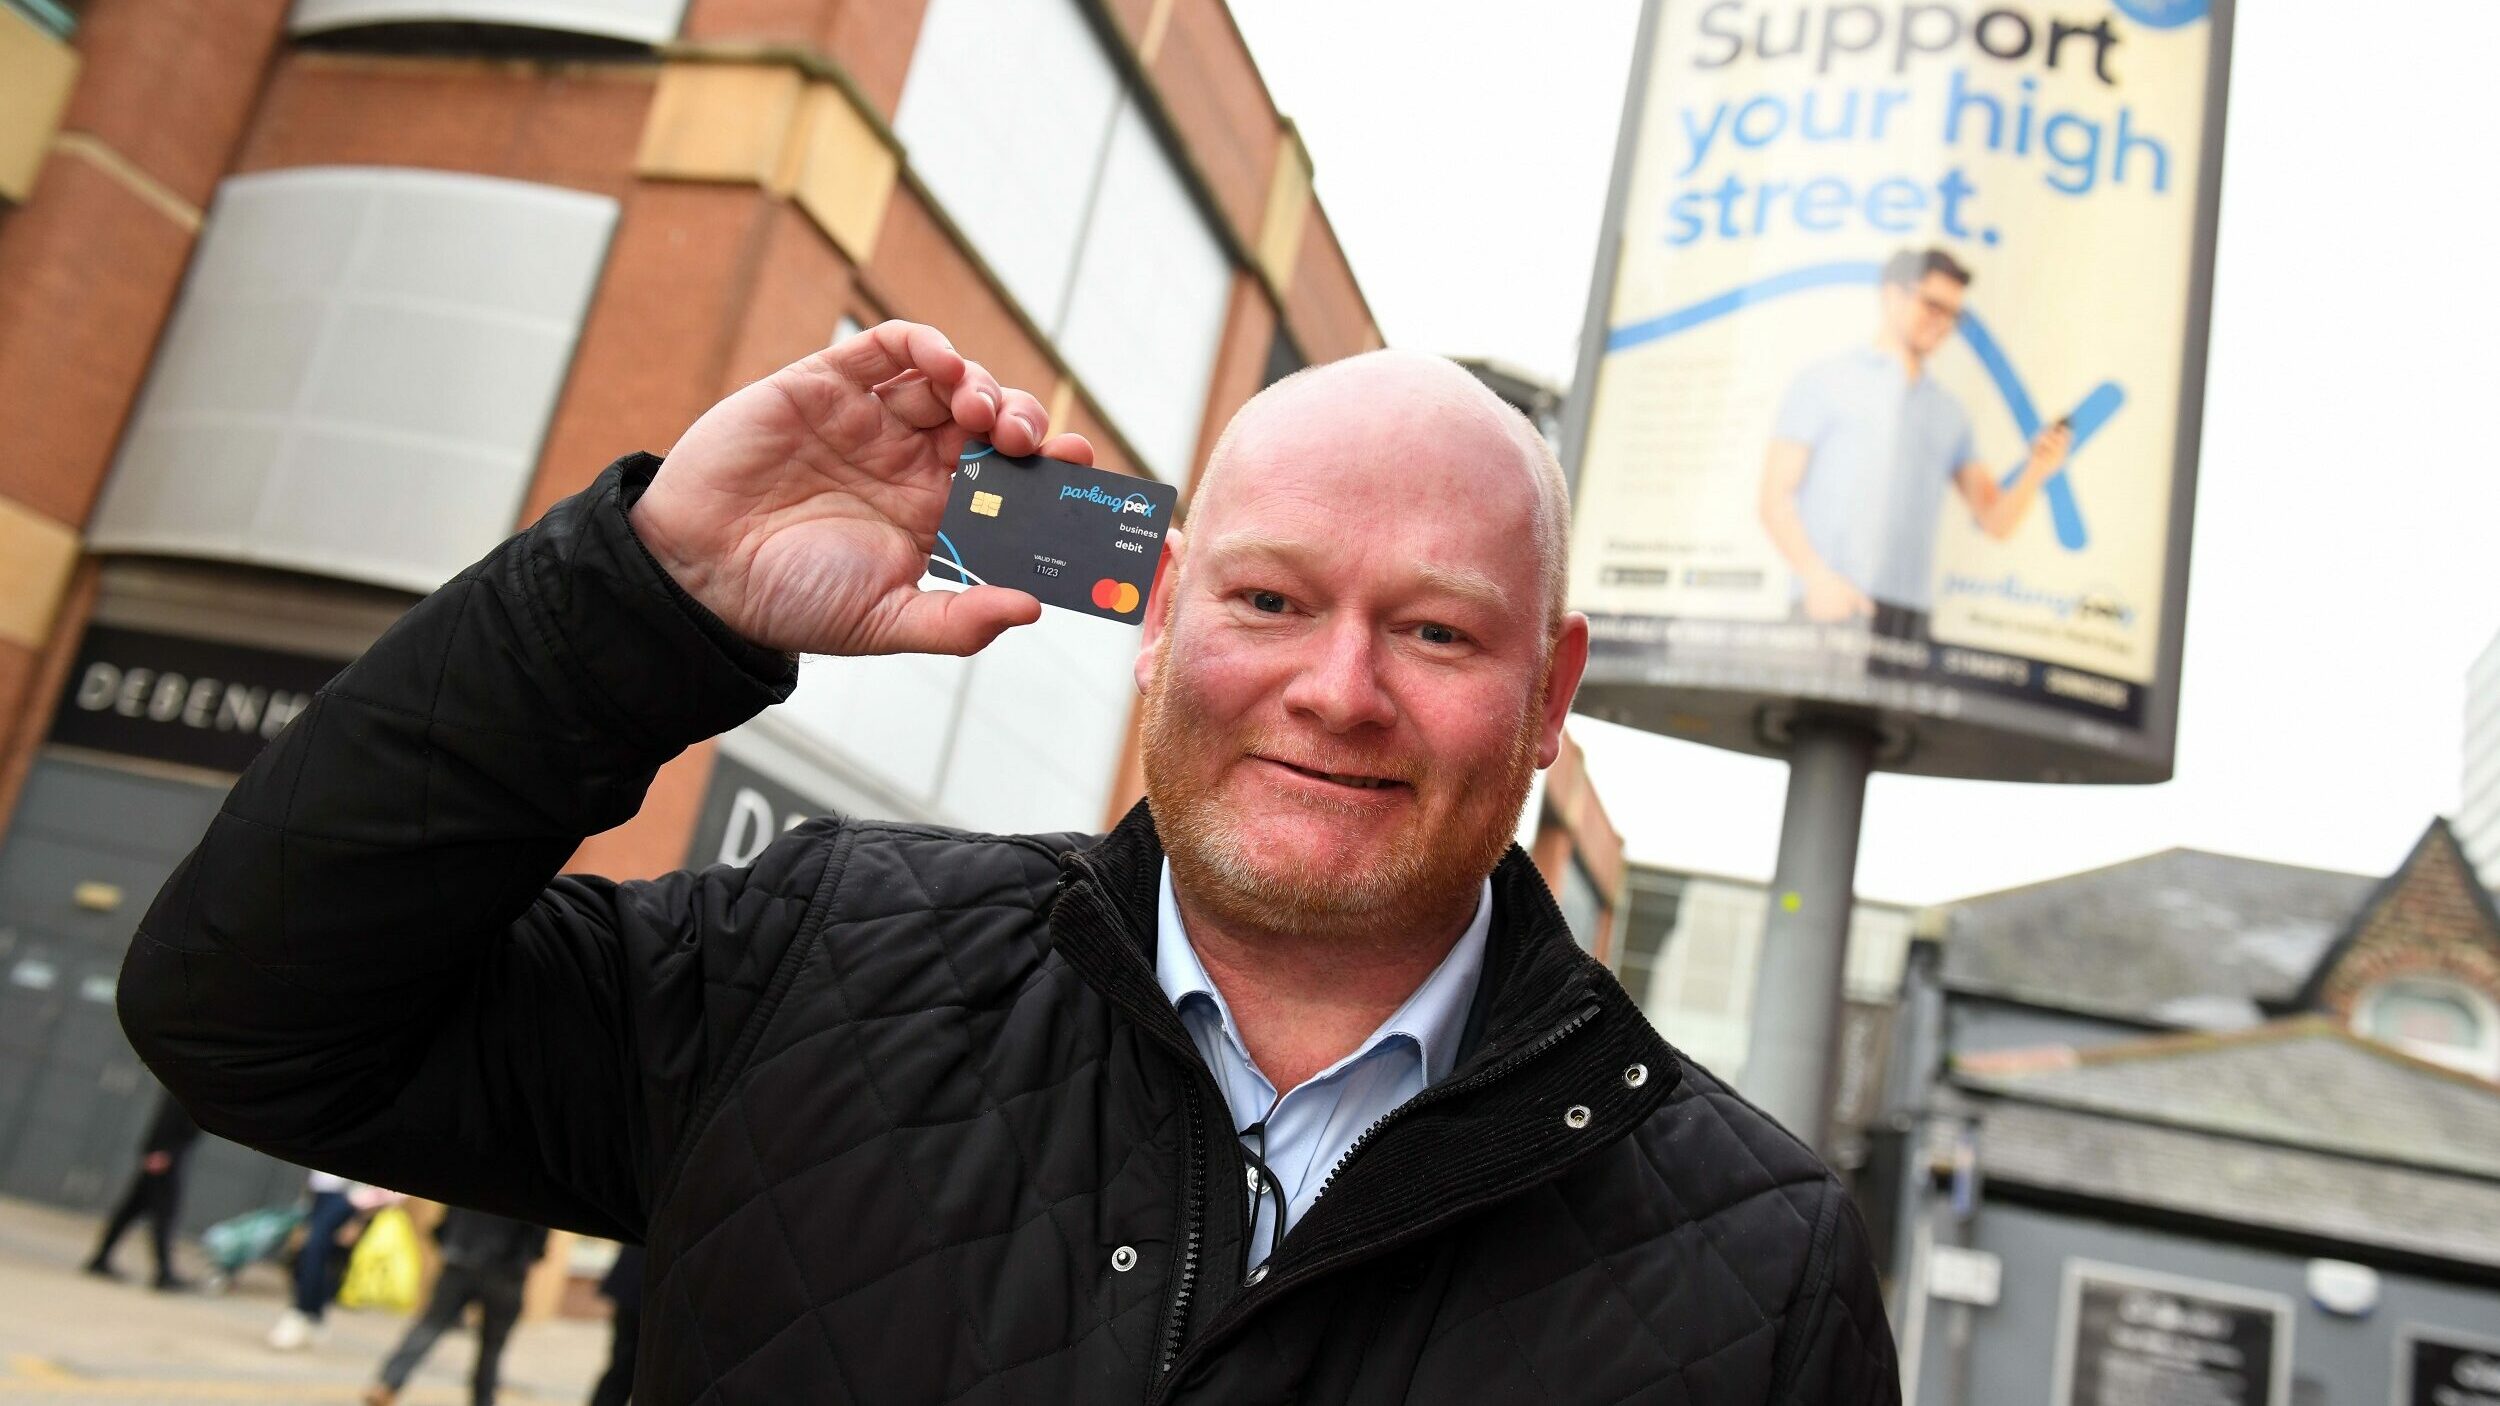 Chris Reed from ParkingPerx holding card up on highstreet